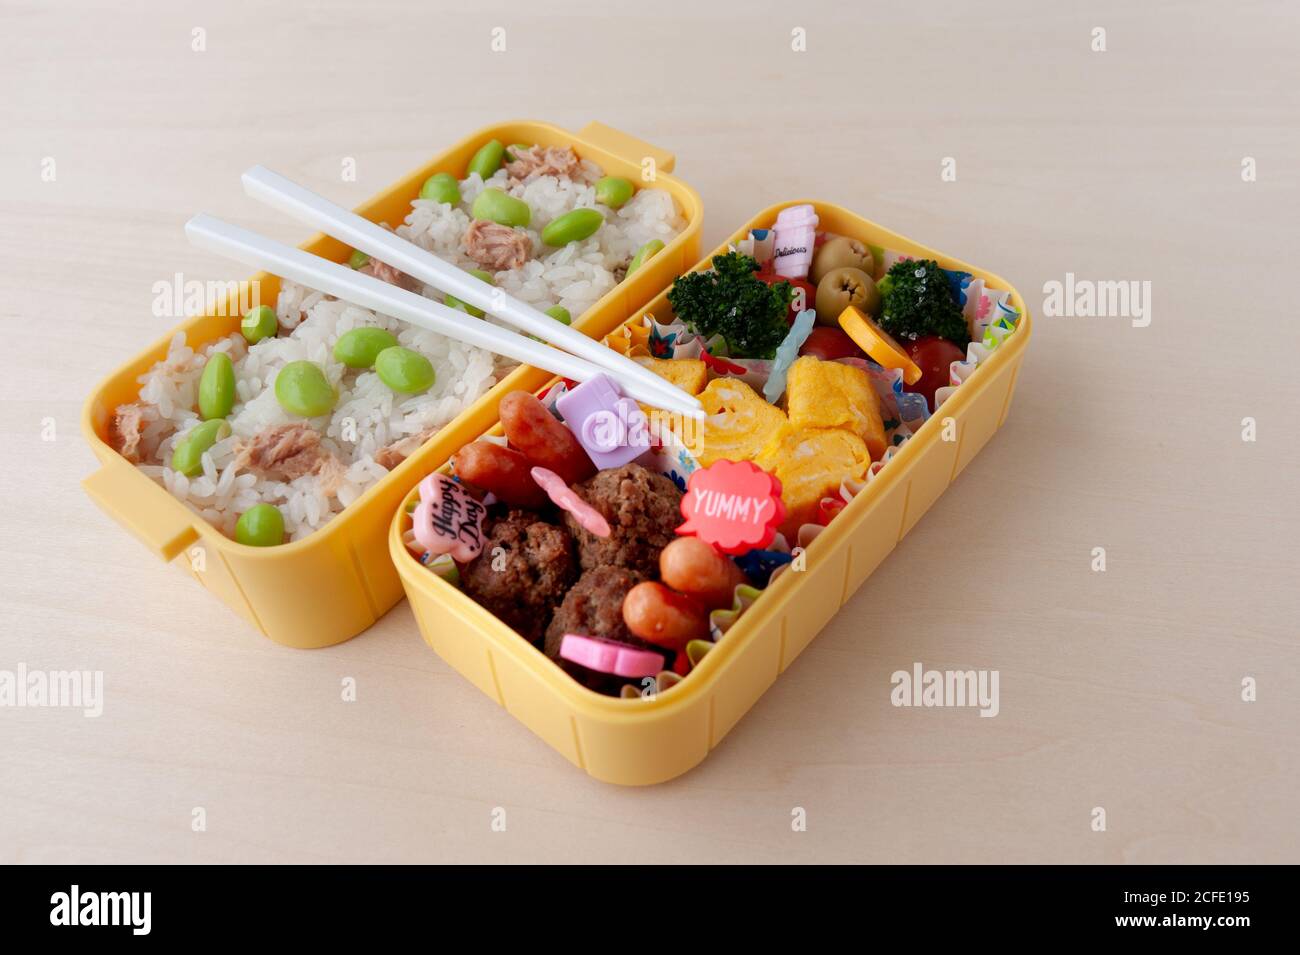 https://c8.alamy.com/comp/2CFE195/japanese-cuisine-traditional-homemade-bento-box-with-rice-meat-egg-fish-vegetables-and-grains-for-children-to-take-to-school-top-view-2CFE195.jpg